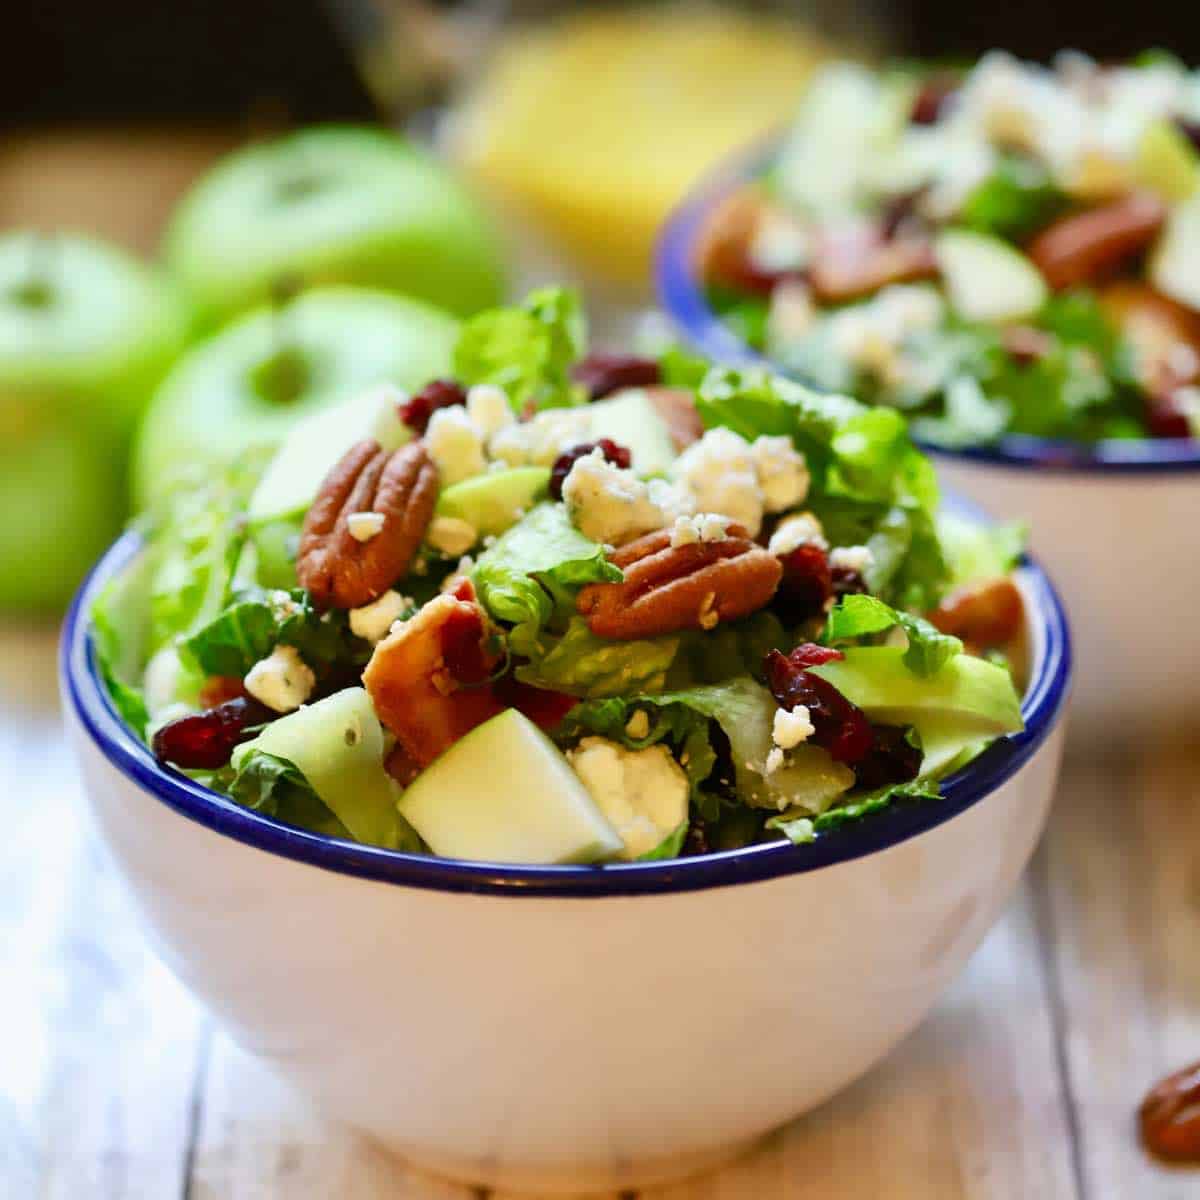 A large white bowl full of chopped salad topped with apples and pecans.